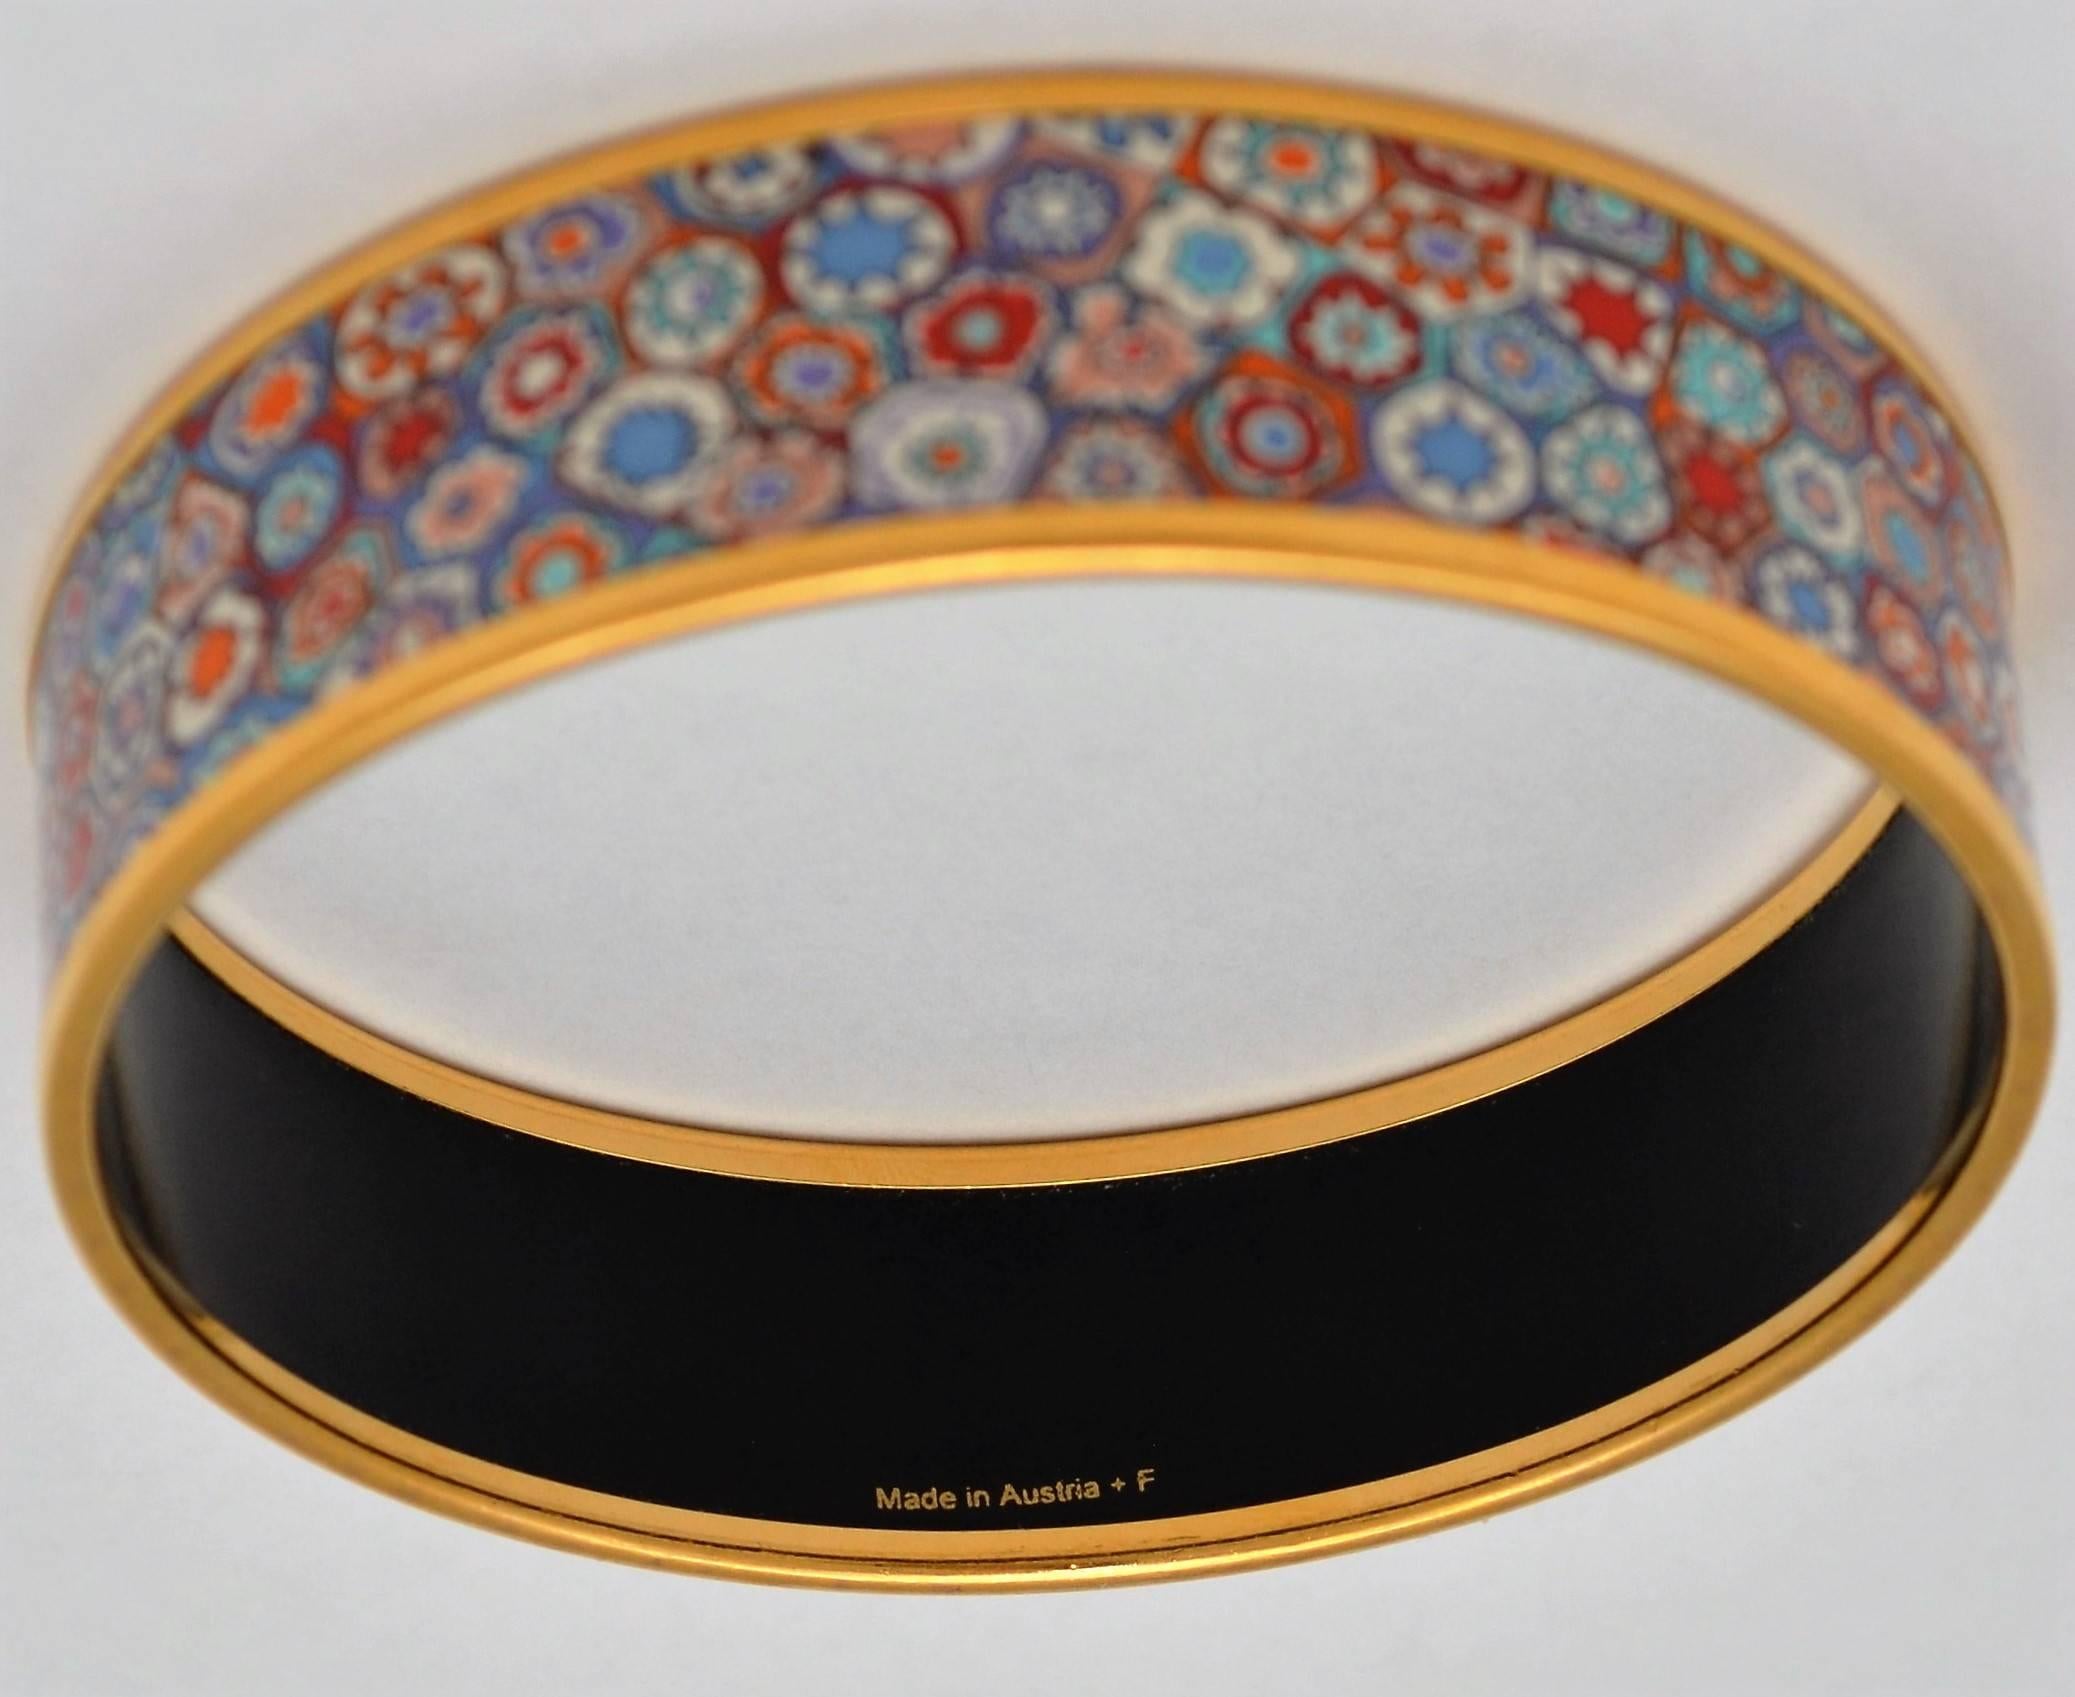 Hermes Paris Multicolor Floral Enamel Print Gold Bangle Bracelet Large Size 70

Hermes Paris bracelet is featured in a gold-tone metal and has a colorful enamel mosaic flower print. Made in Austria. Diameter measures 2.75 inches and is .75 inches